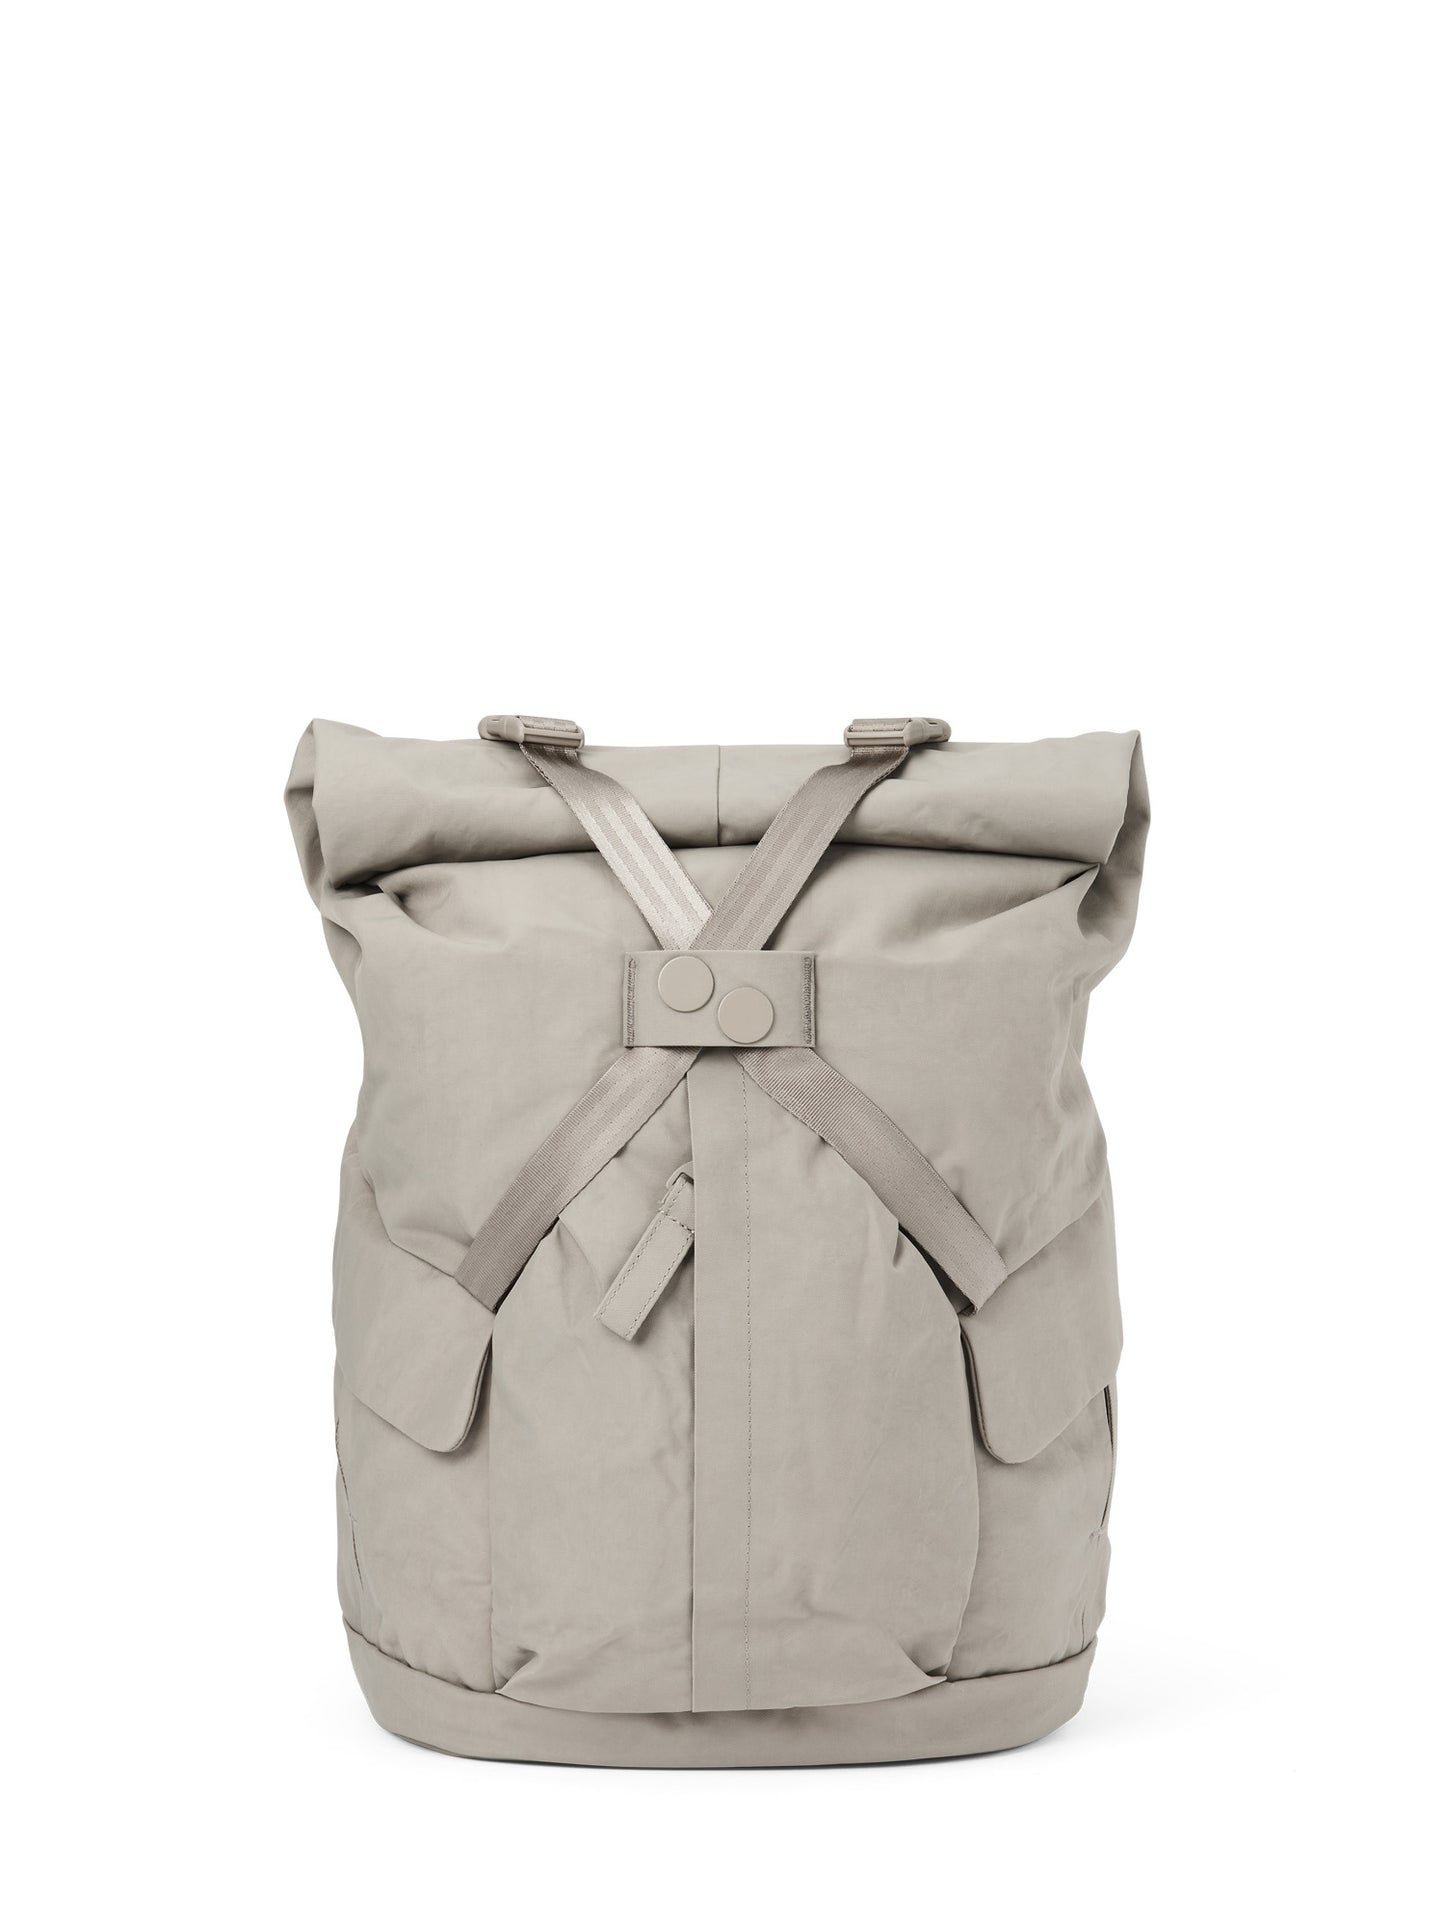 pinqponq-backpack-Kross-Crinkle-Taupe-front